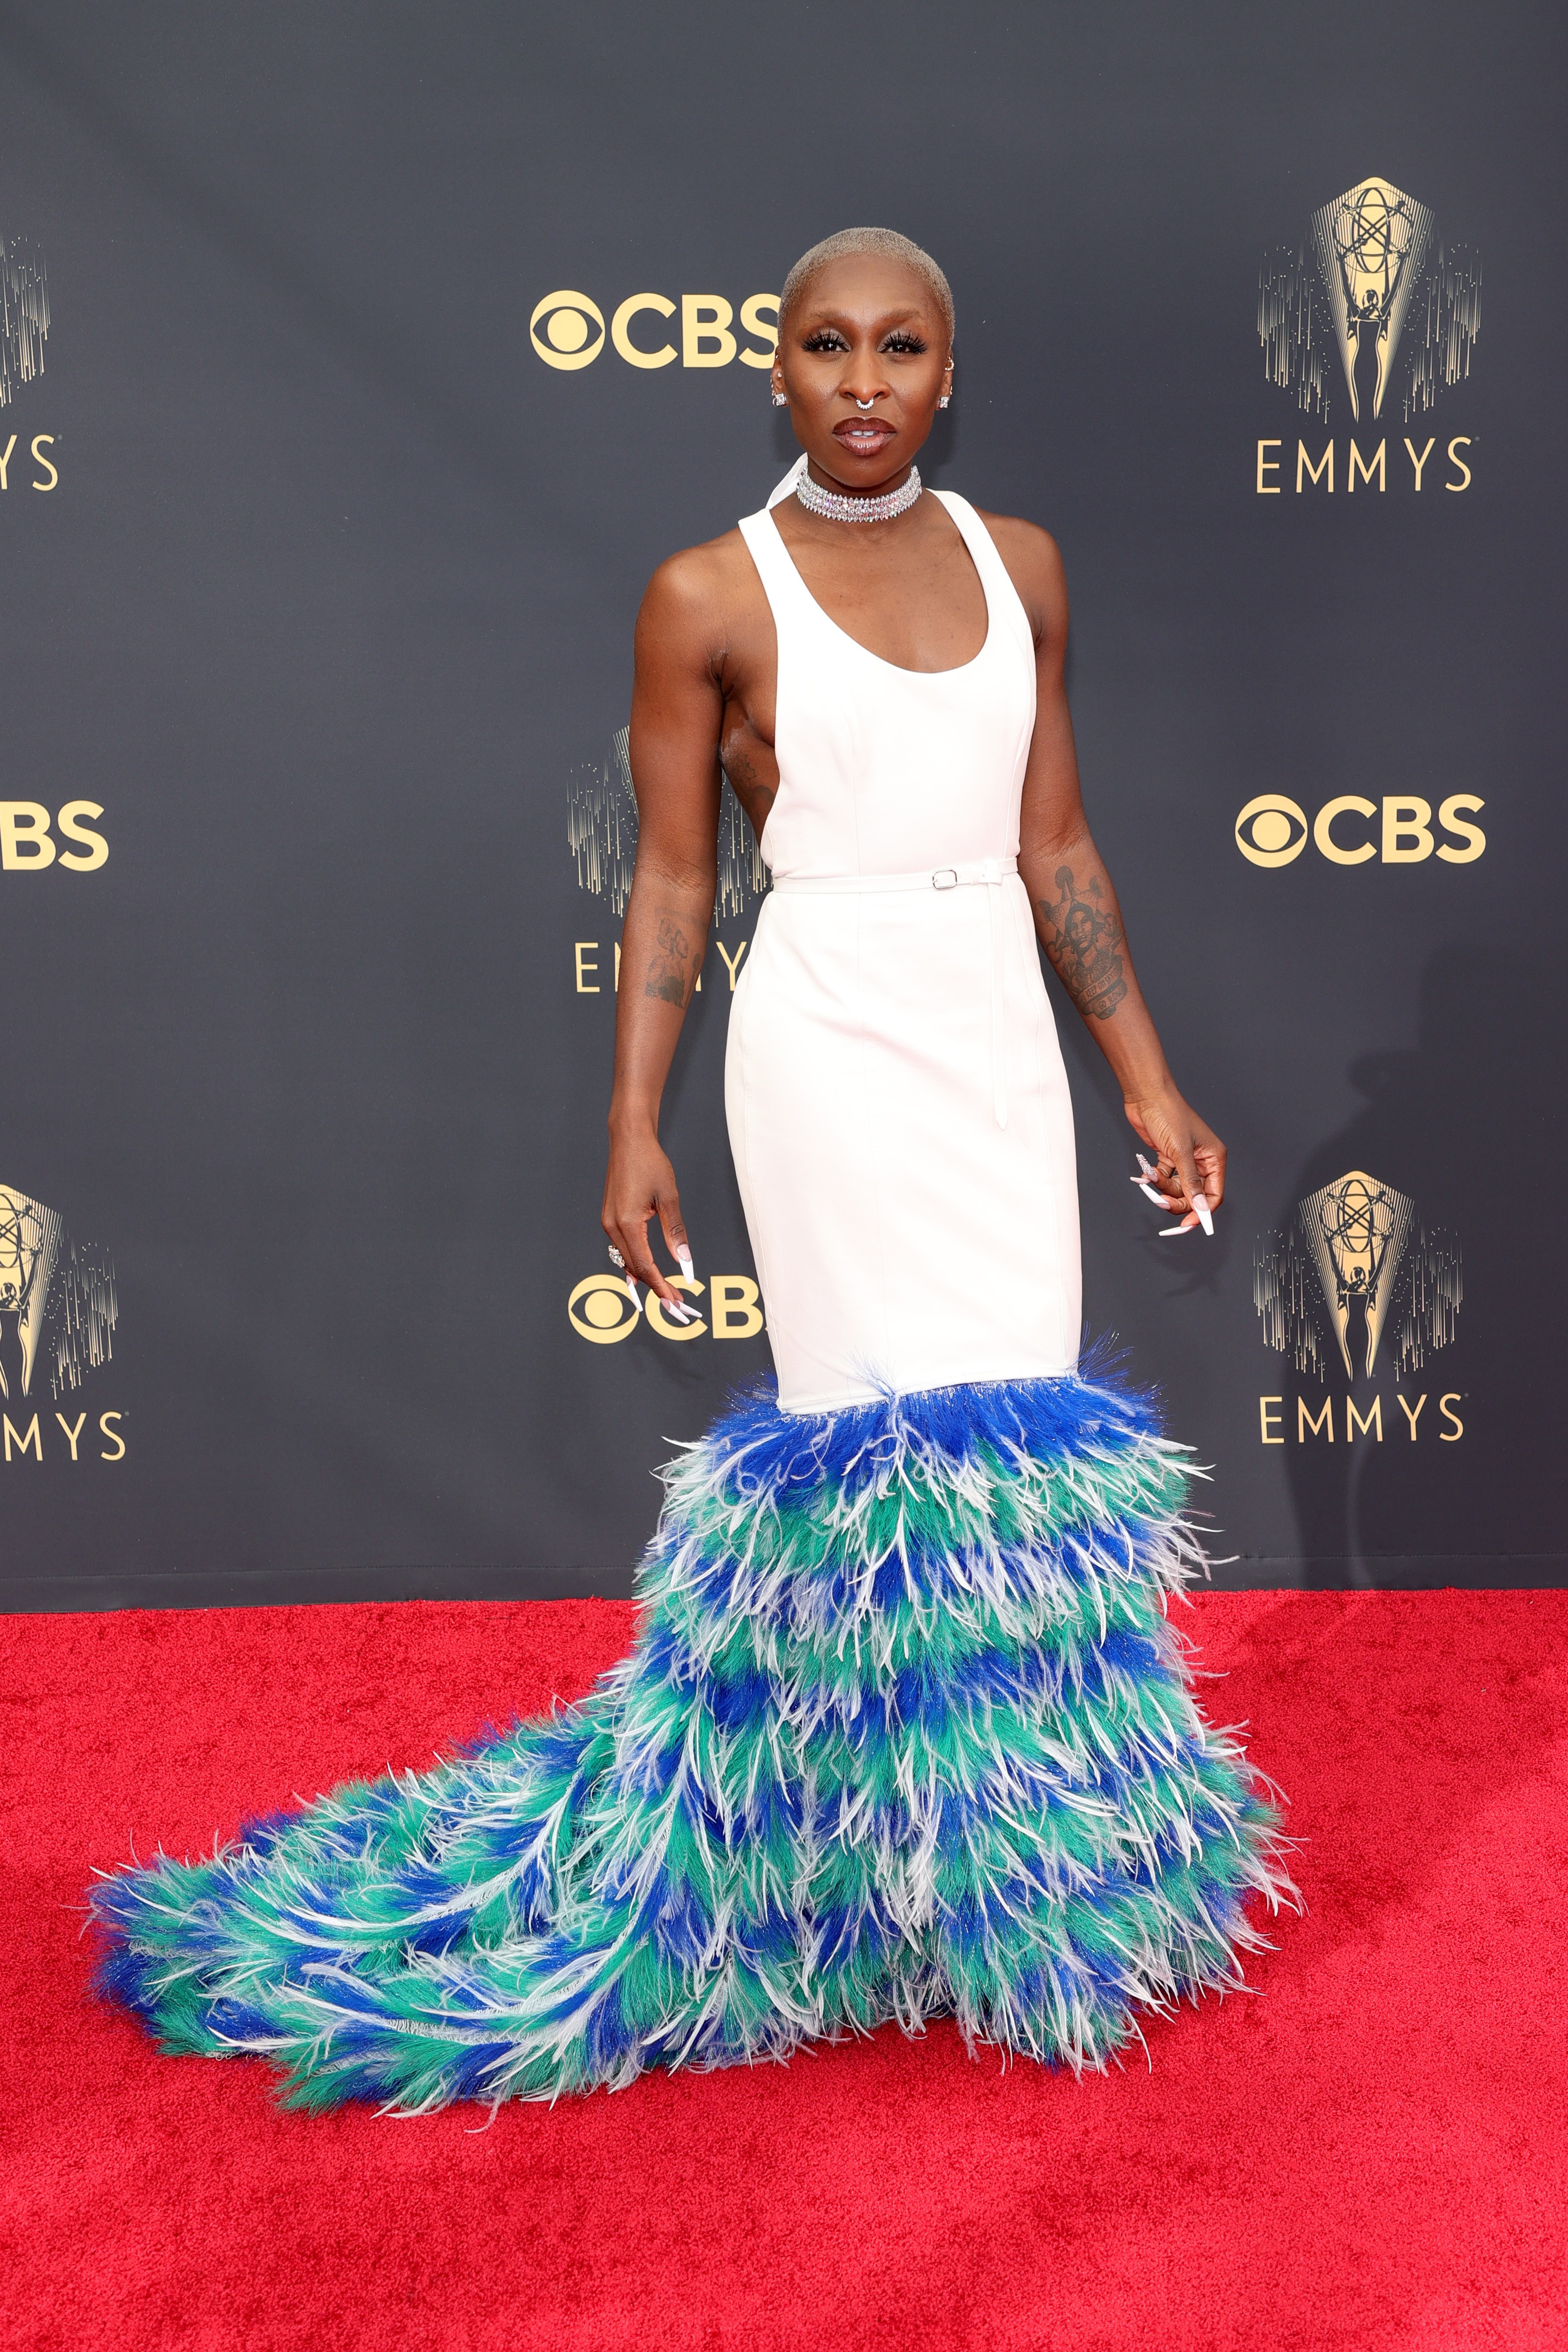 LOS ANGELES, CALIFORNIA - SEPTEMBER 19: Cynthia Erivo attends the 73rd Primetime Emmy Awards at L.A. LIVE on September 19, 2021 in Los Angeles, California. (Photo by Rich Fury/Getty Images) (Foto: Getty Images)